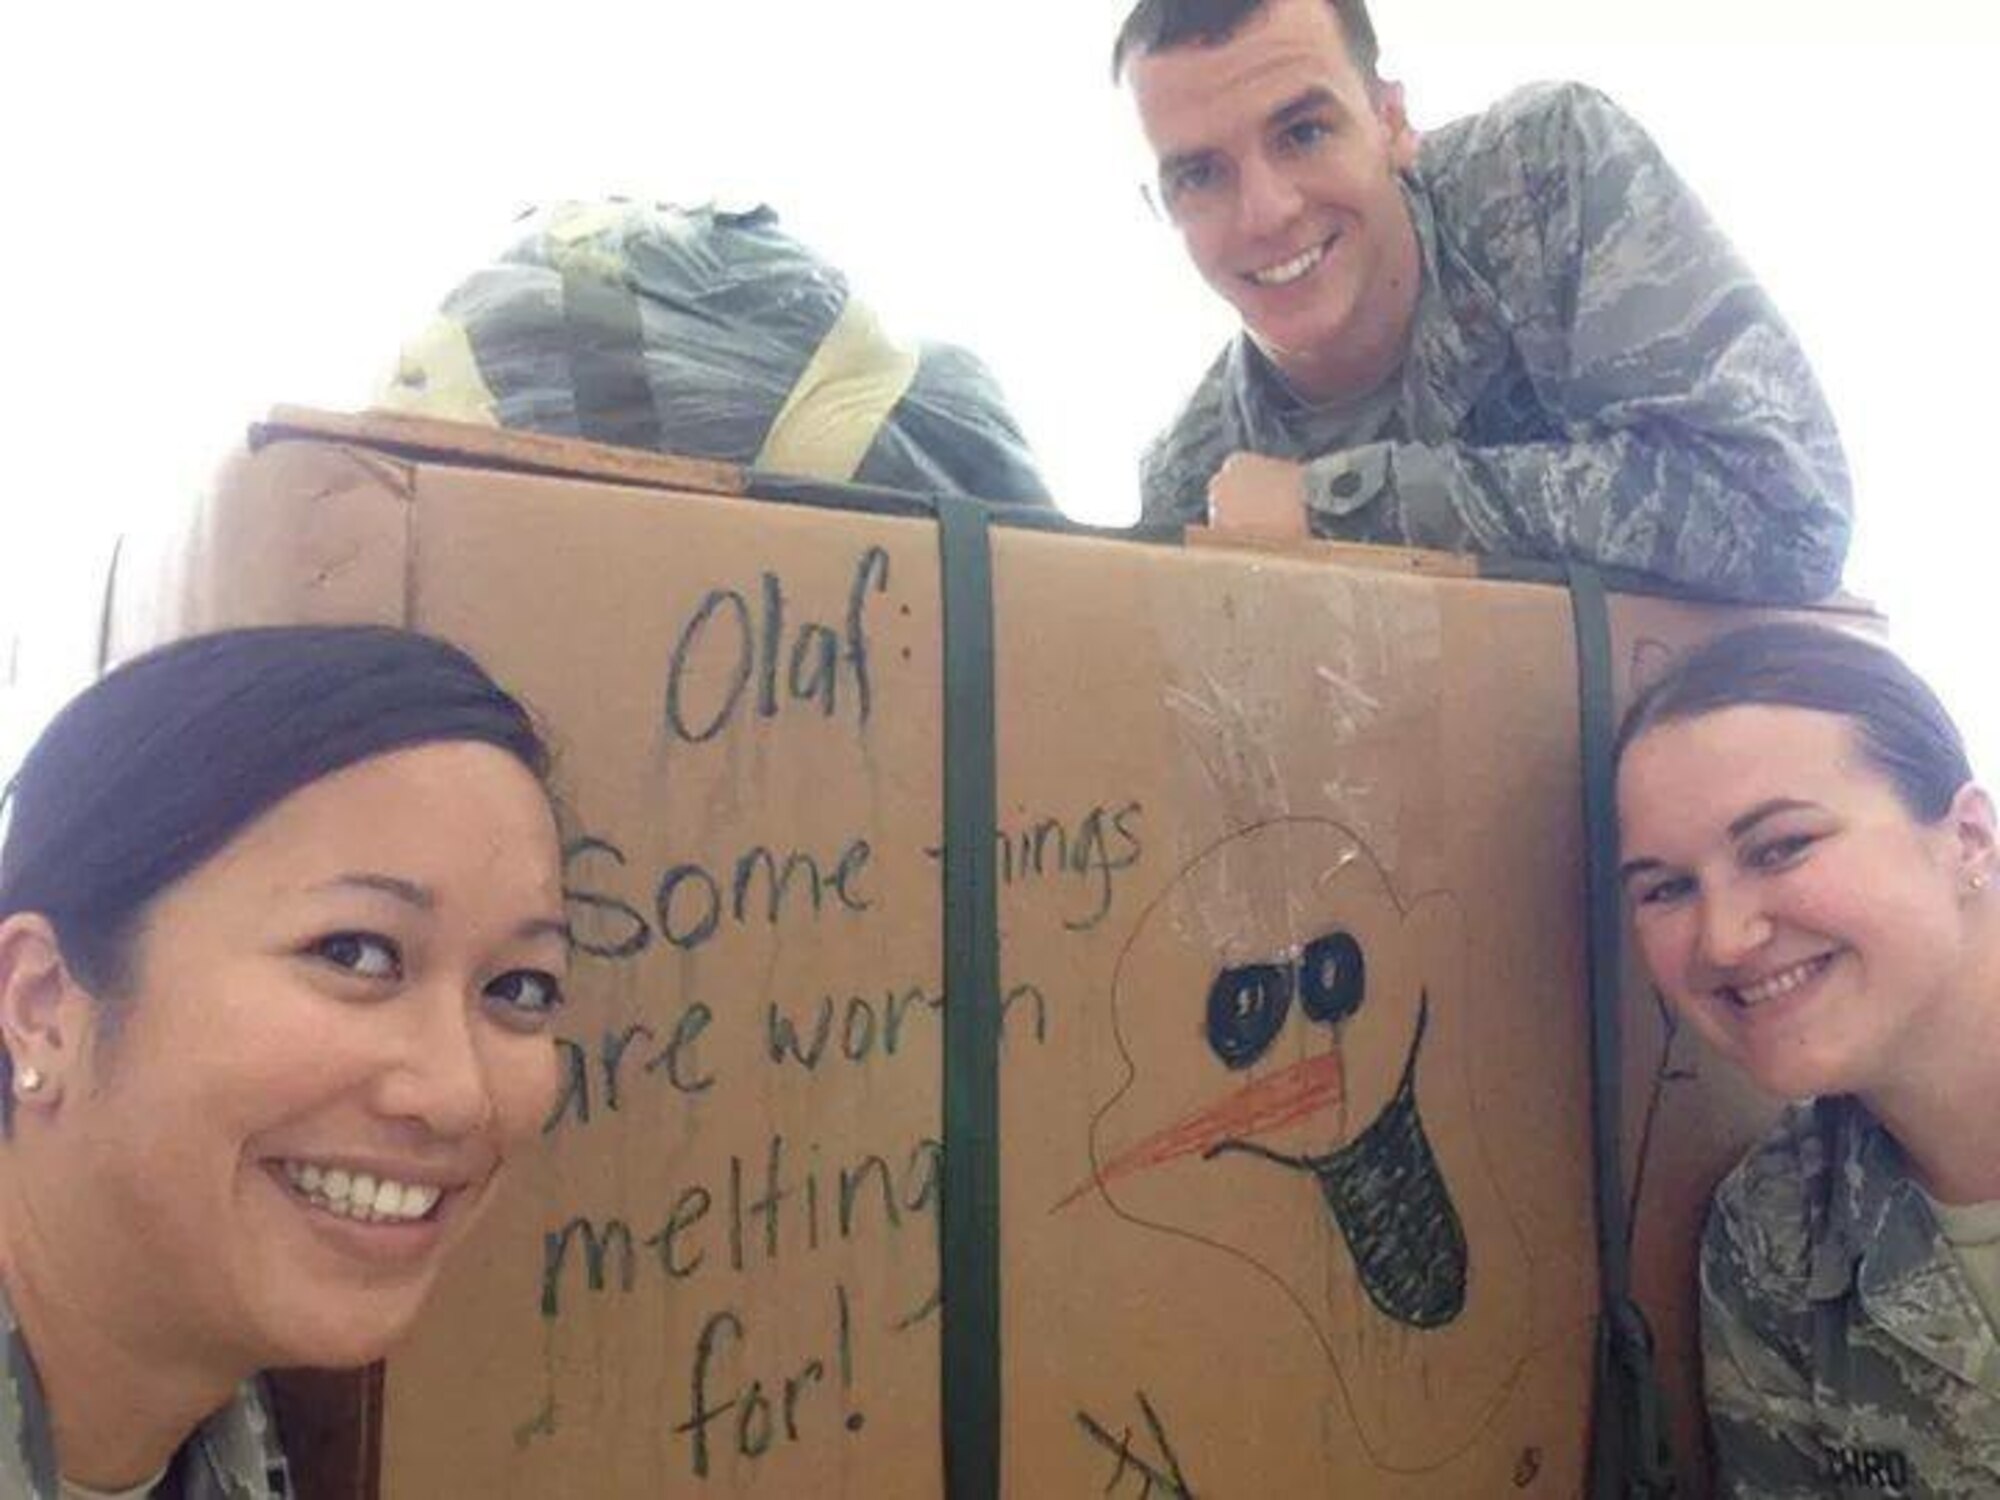 2nd Lt. Victoria Cachro (right), 36th Wing Plans, Programs and Readiness strategic planner, poses in front of a finished packaged box for Operation Christmas Drop in Hangar 3, Dec., 2014. Cachro volunteered more than 1,500 hours to the base and local community during the past year. (Courtesy photo)